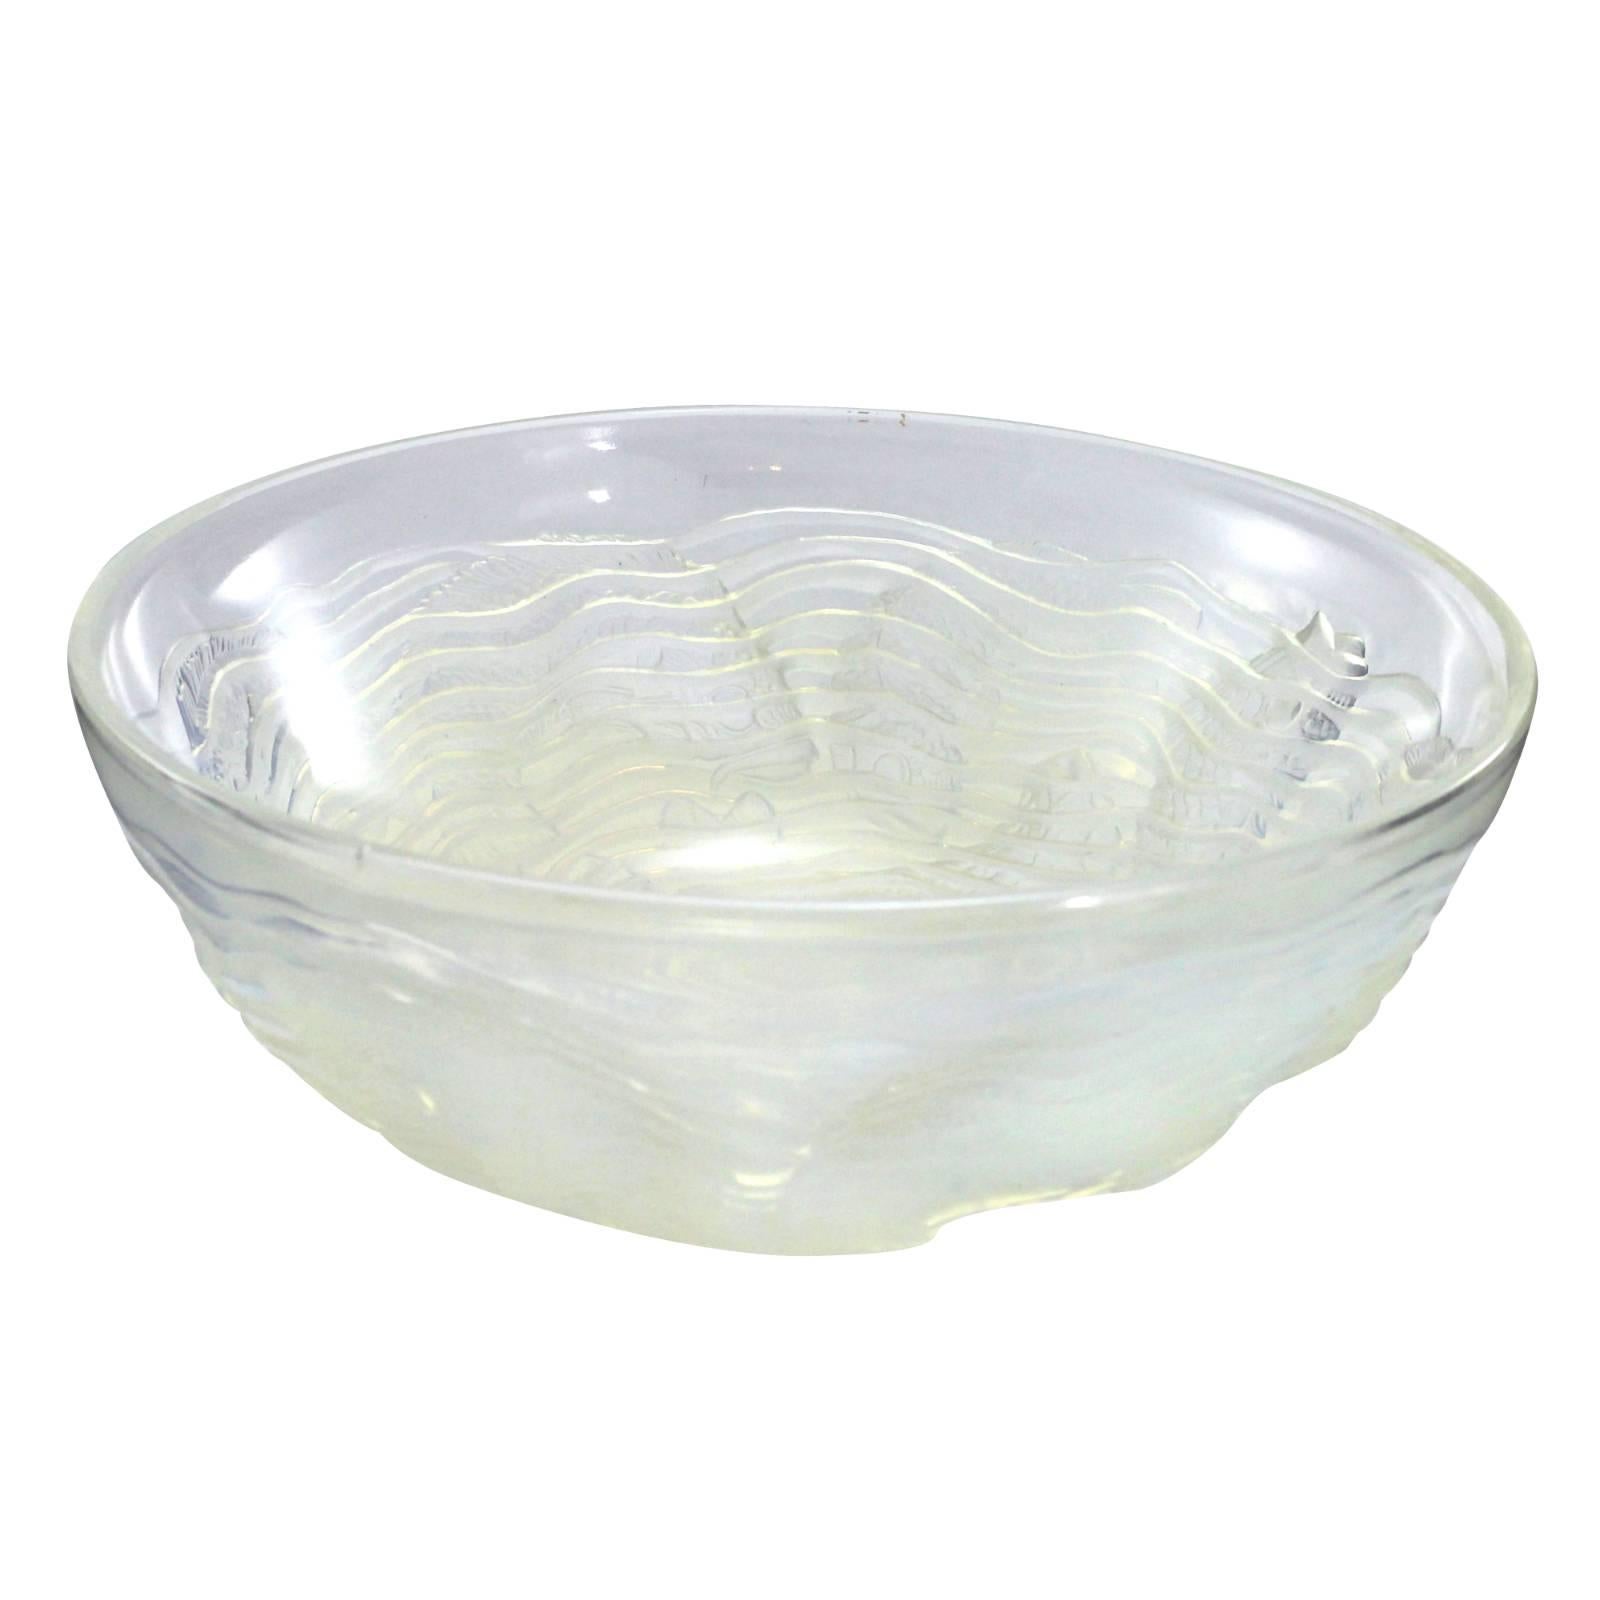 Early 20th Century Art Deco Opalescent Glass 'Dauphin' Bowl by René Lalique For Sale 2